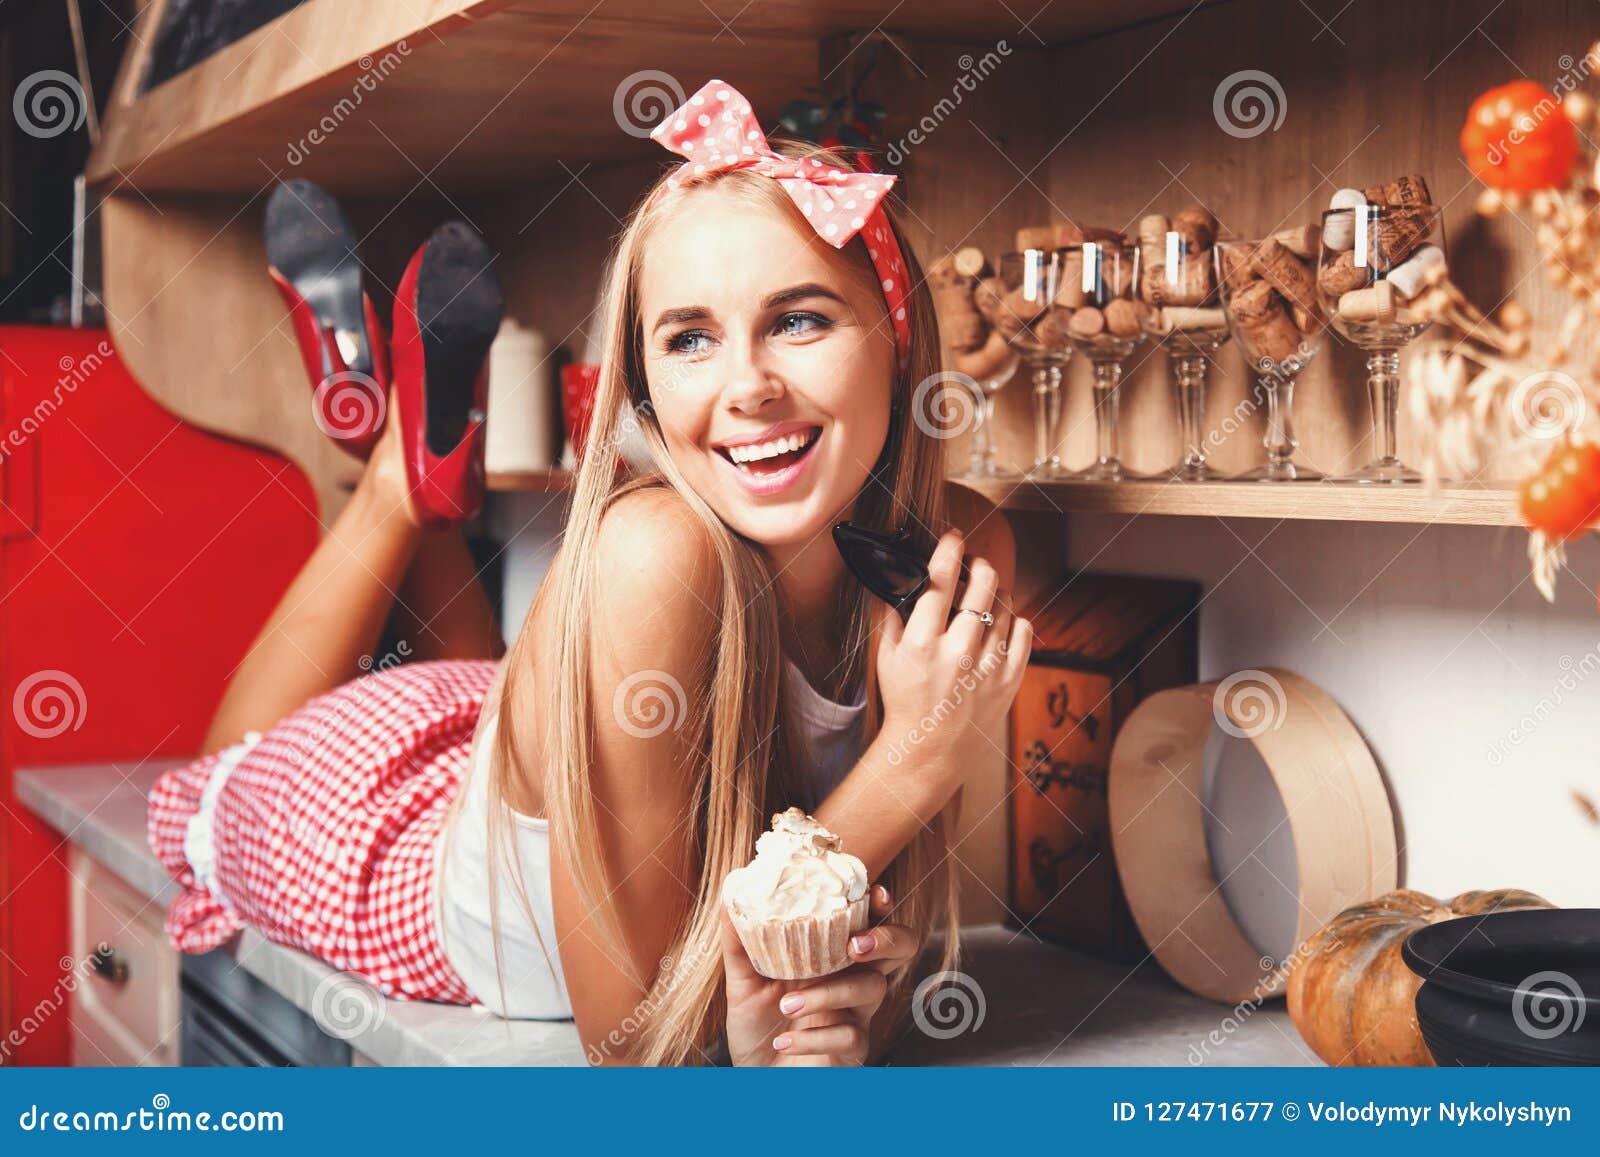 woman laying and smiling with cupcake